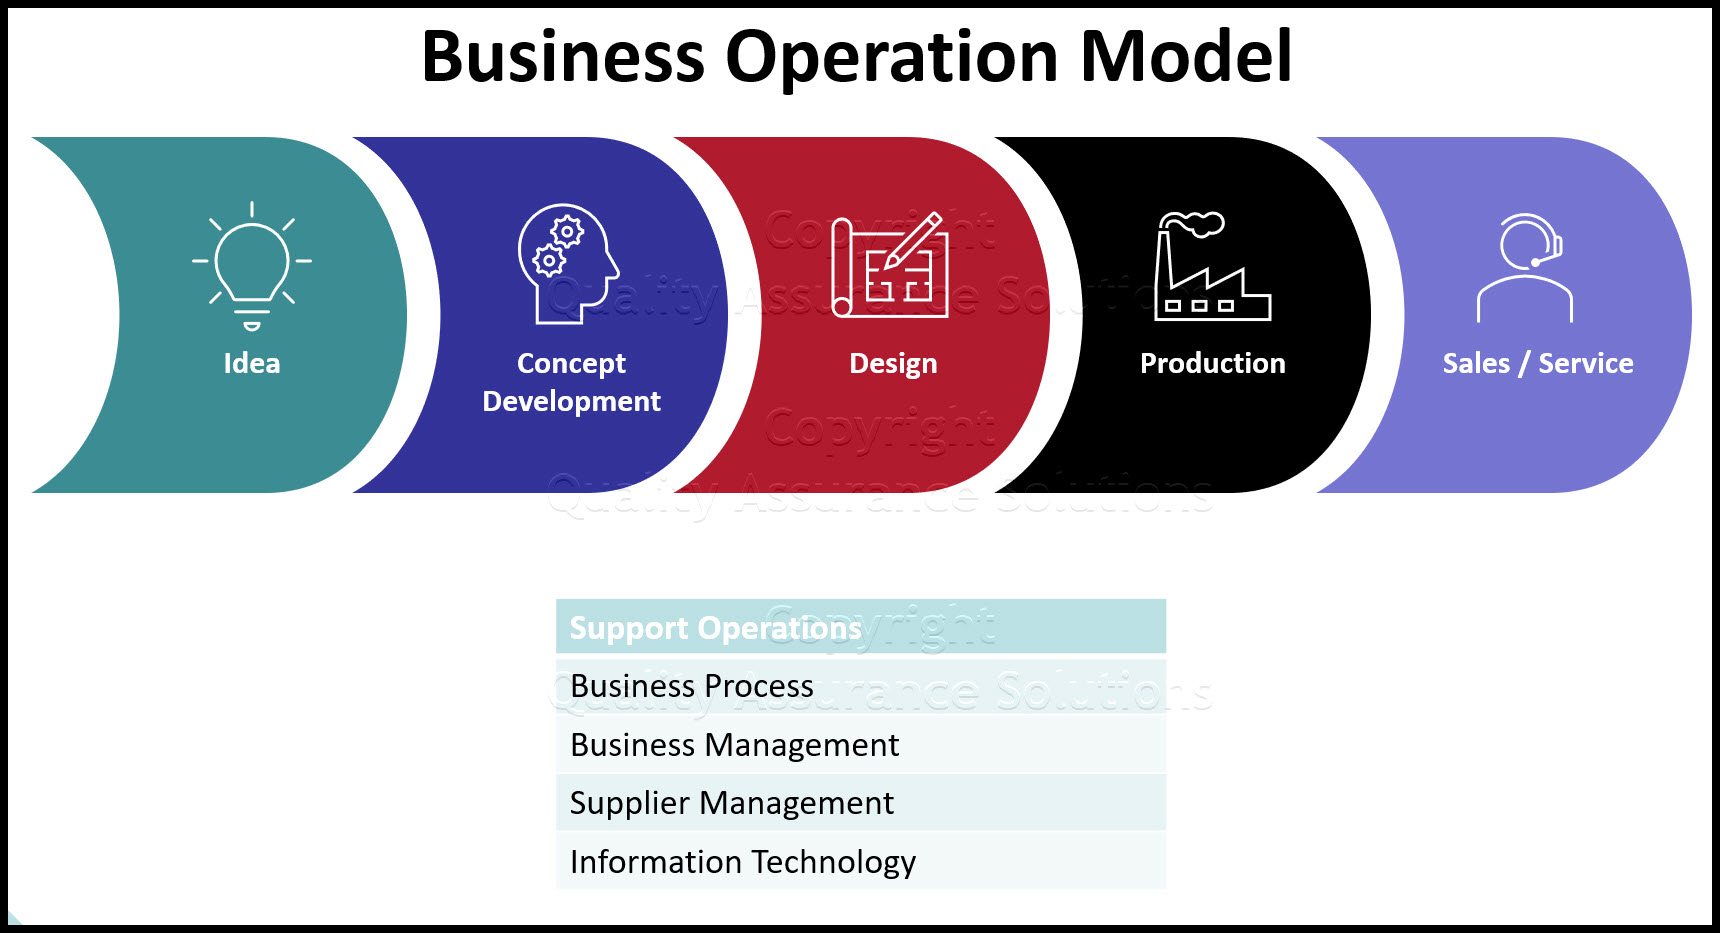 Know Business Operation Model is the 1st step to understand business excellence